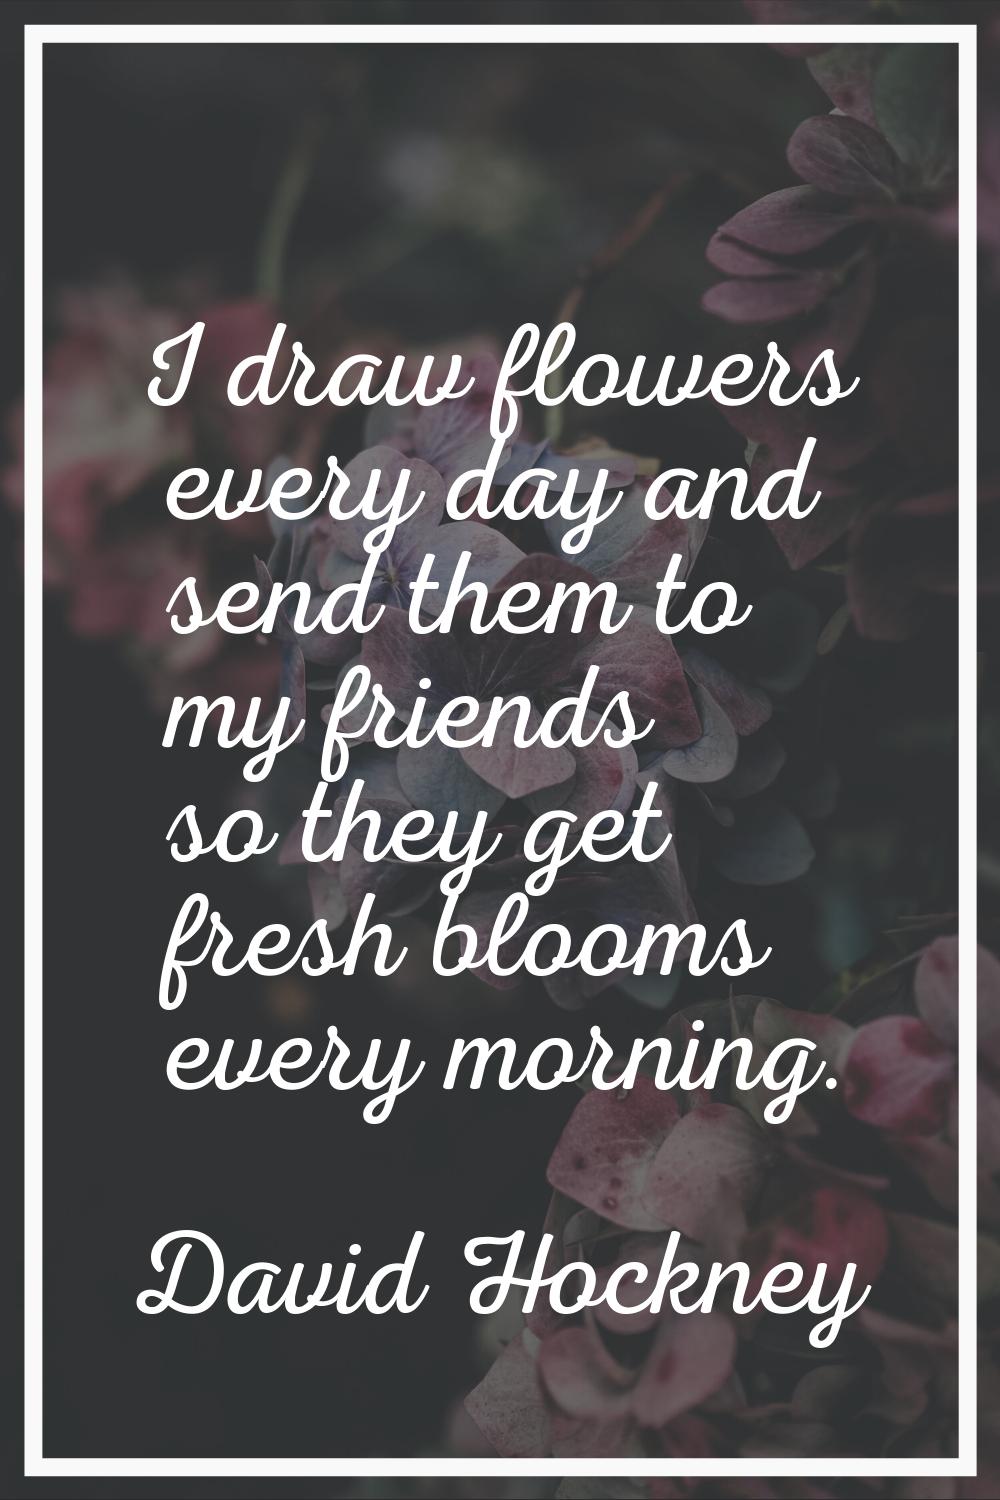 I draw flowers every day and send them to my friends so they get fresh blooms every morning.